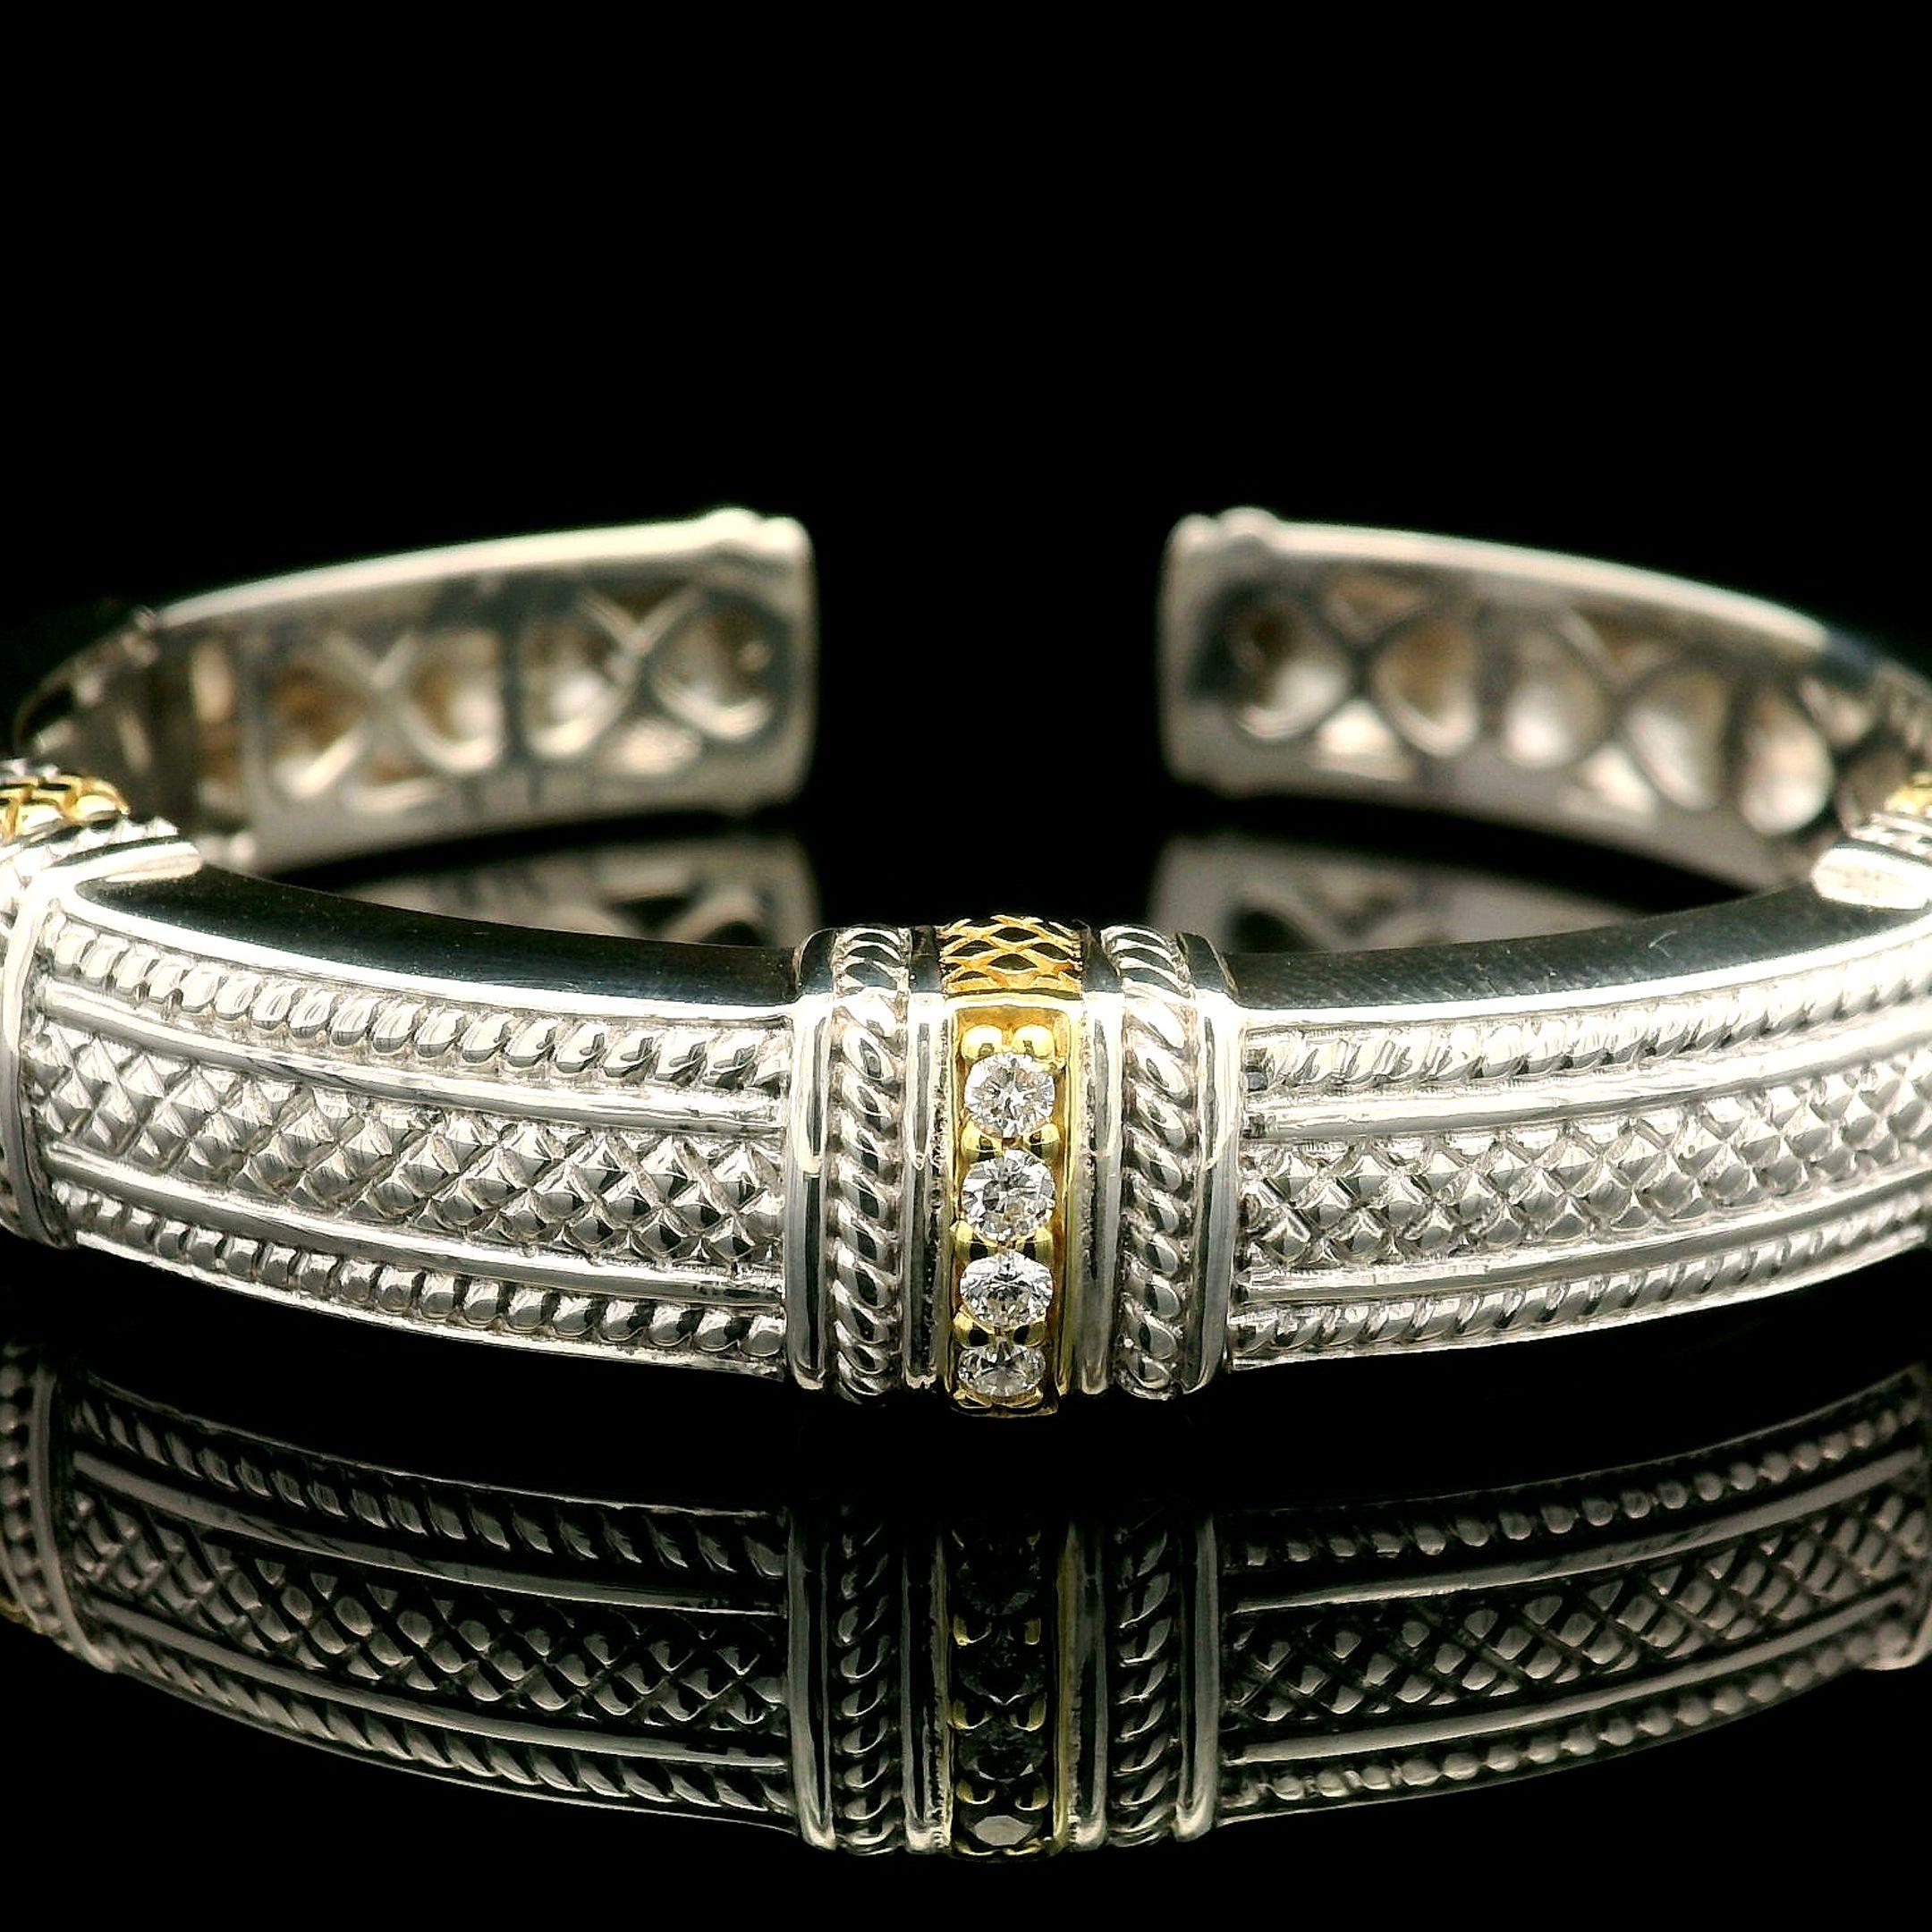 Round Cut Sterling Silver Diamond Judith Ripka Twisted Rope Design Cuff Bangle Bracelet For Sale